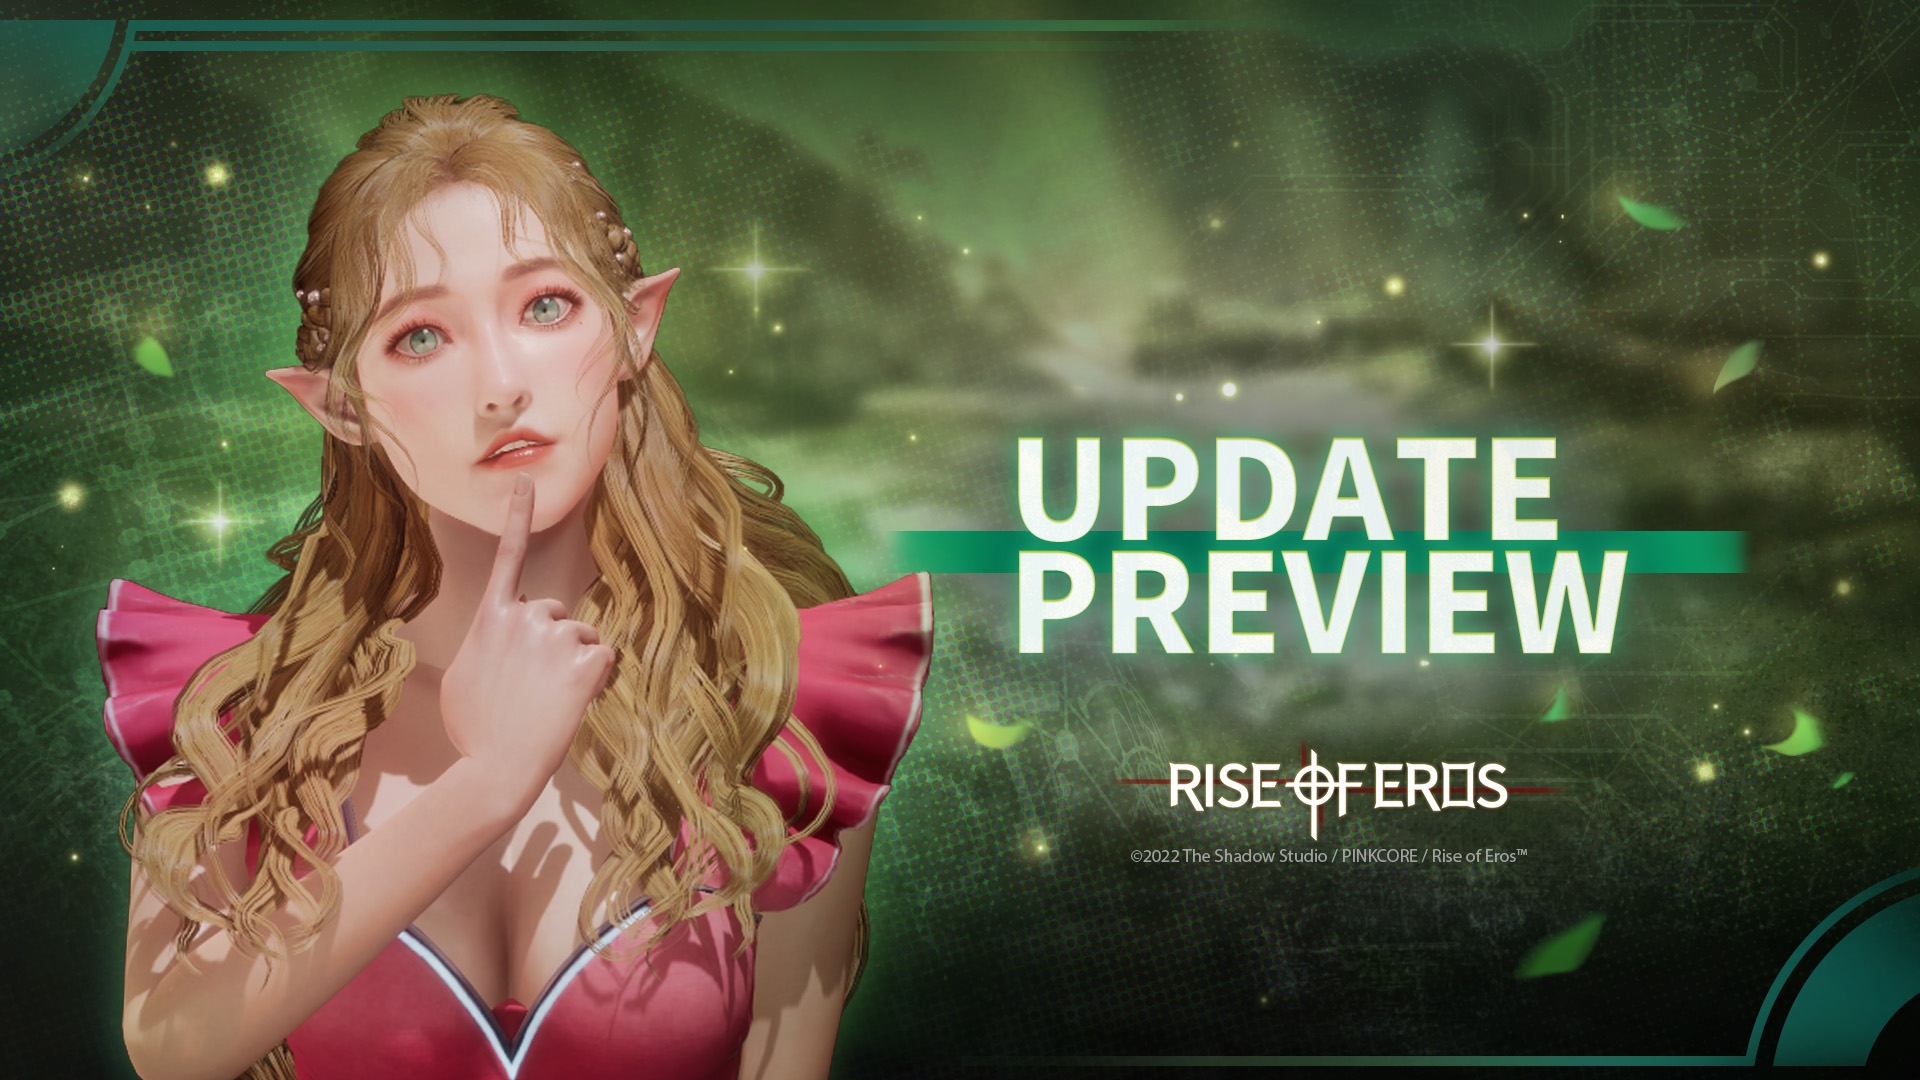 09/20 Update Preview